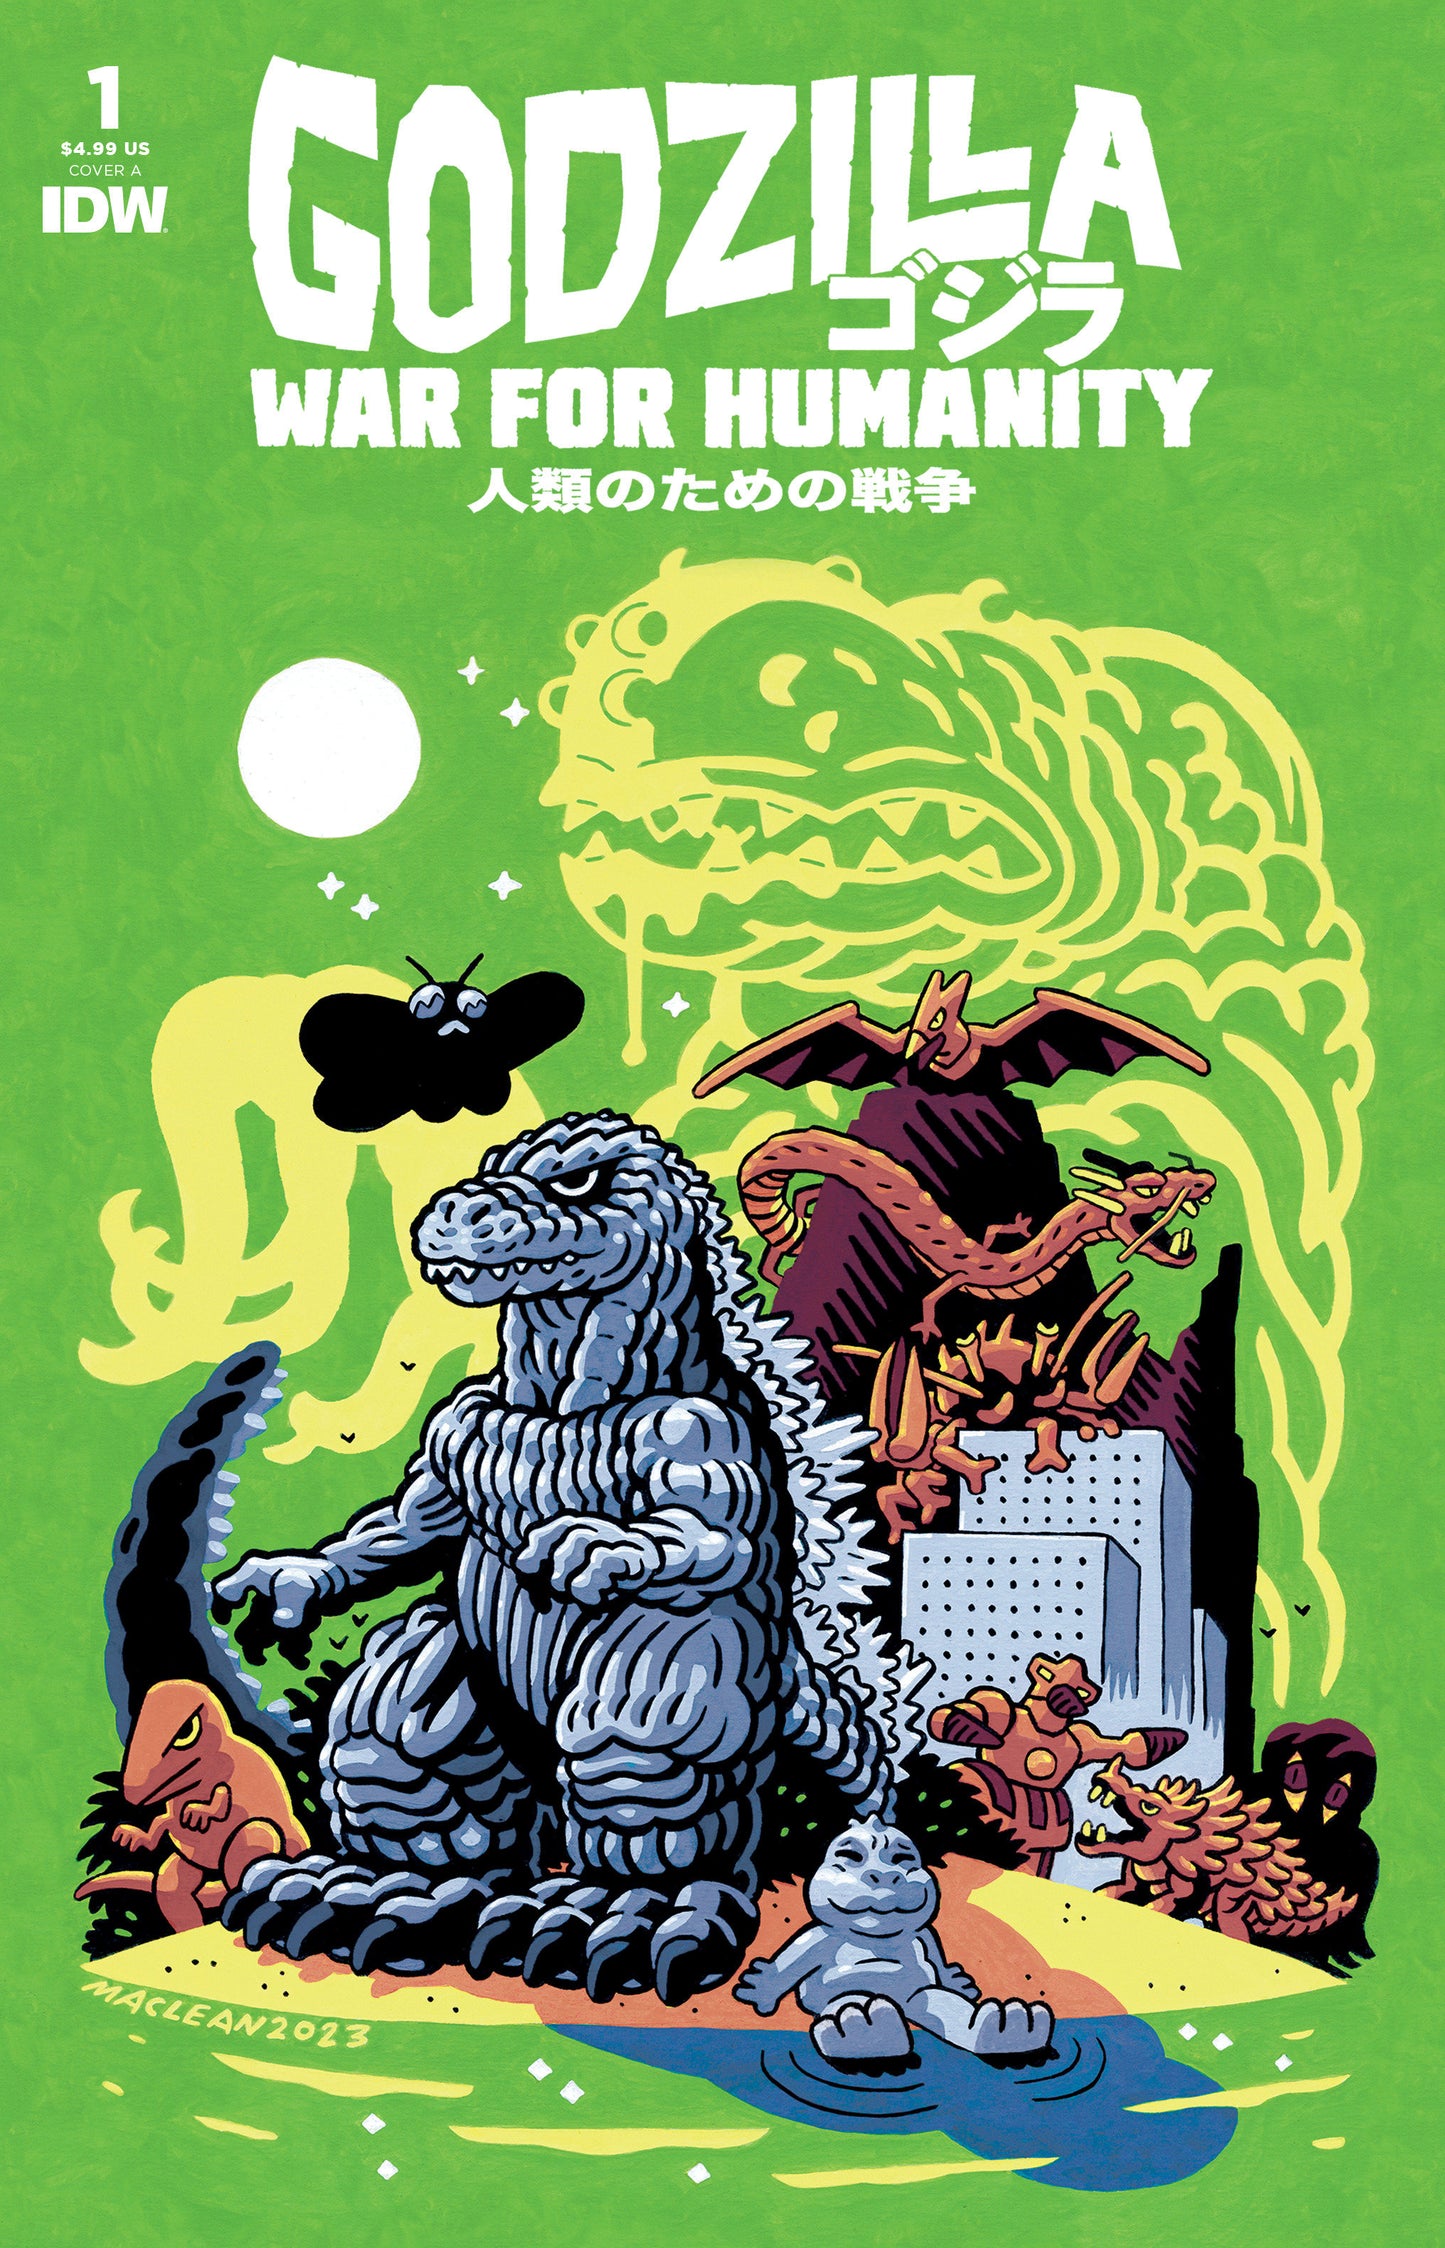 Godzilla: The War For Humanity #1 Cover A (Maclean)